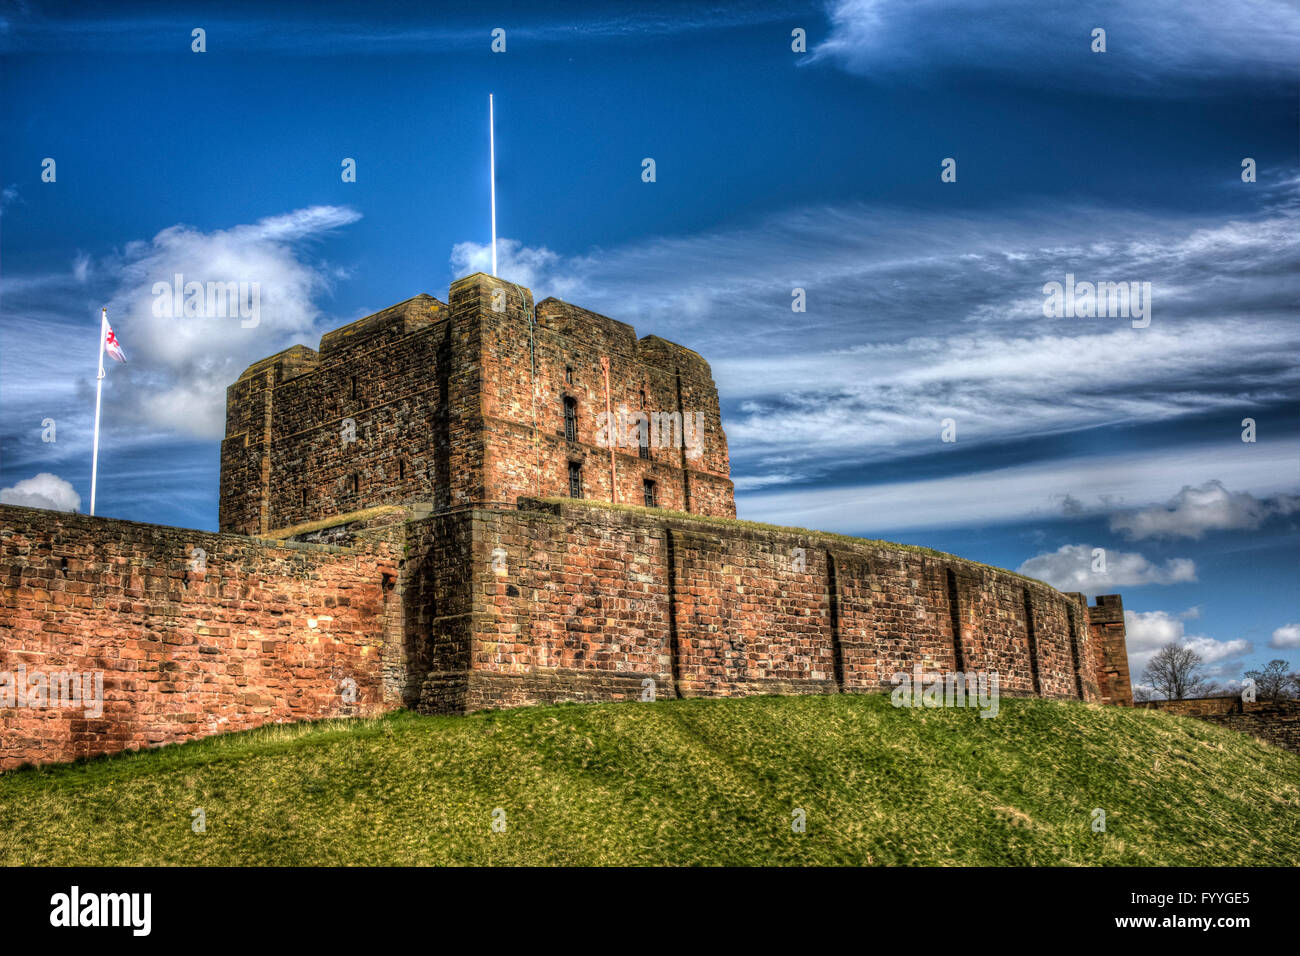 Carlisle Castle - tower on the hill. HDR image. Stock Photo